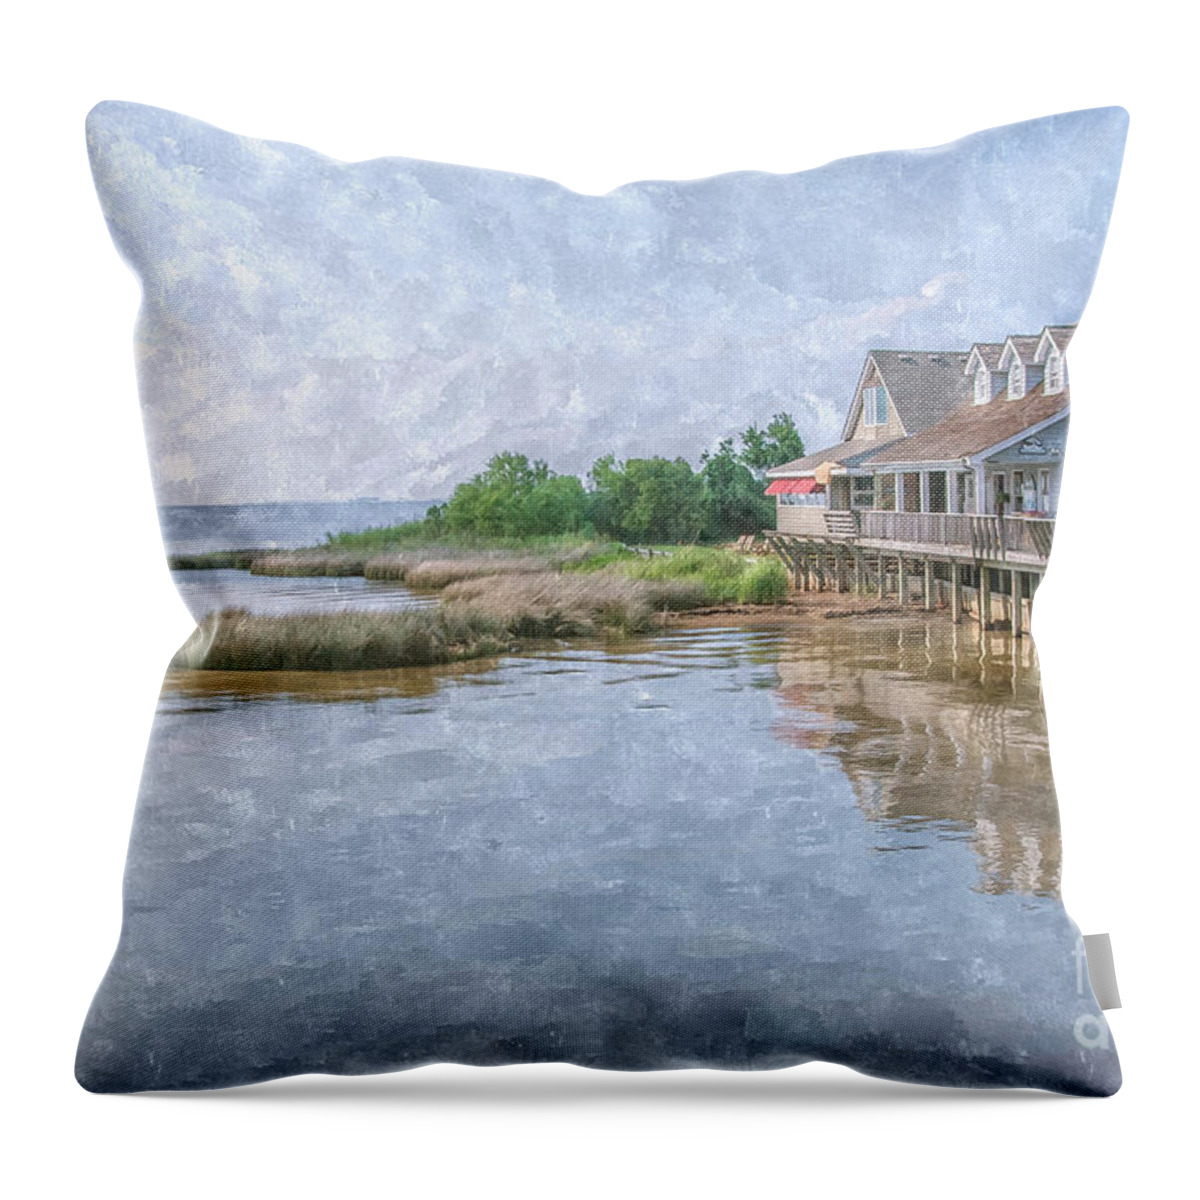 Duck Shops Outer Banks Throw Pillow featuring the digital art Duck Shops Outer Banks by Randy Steele